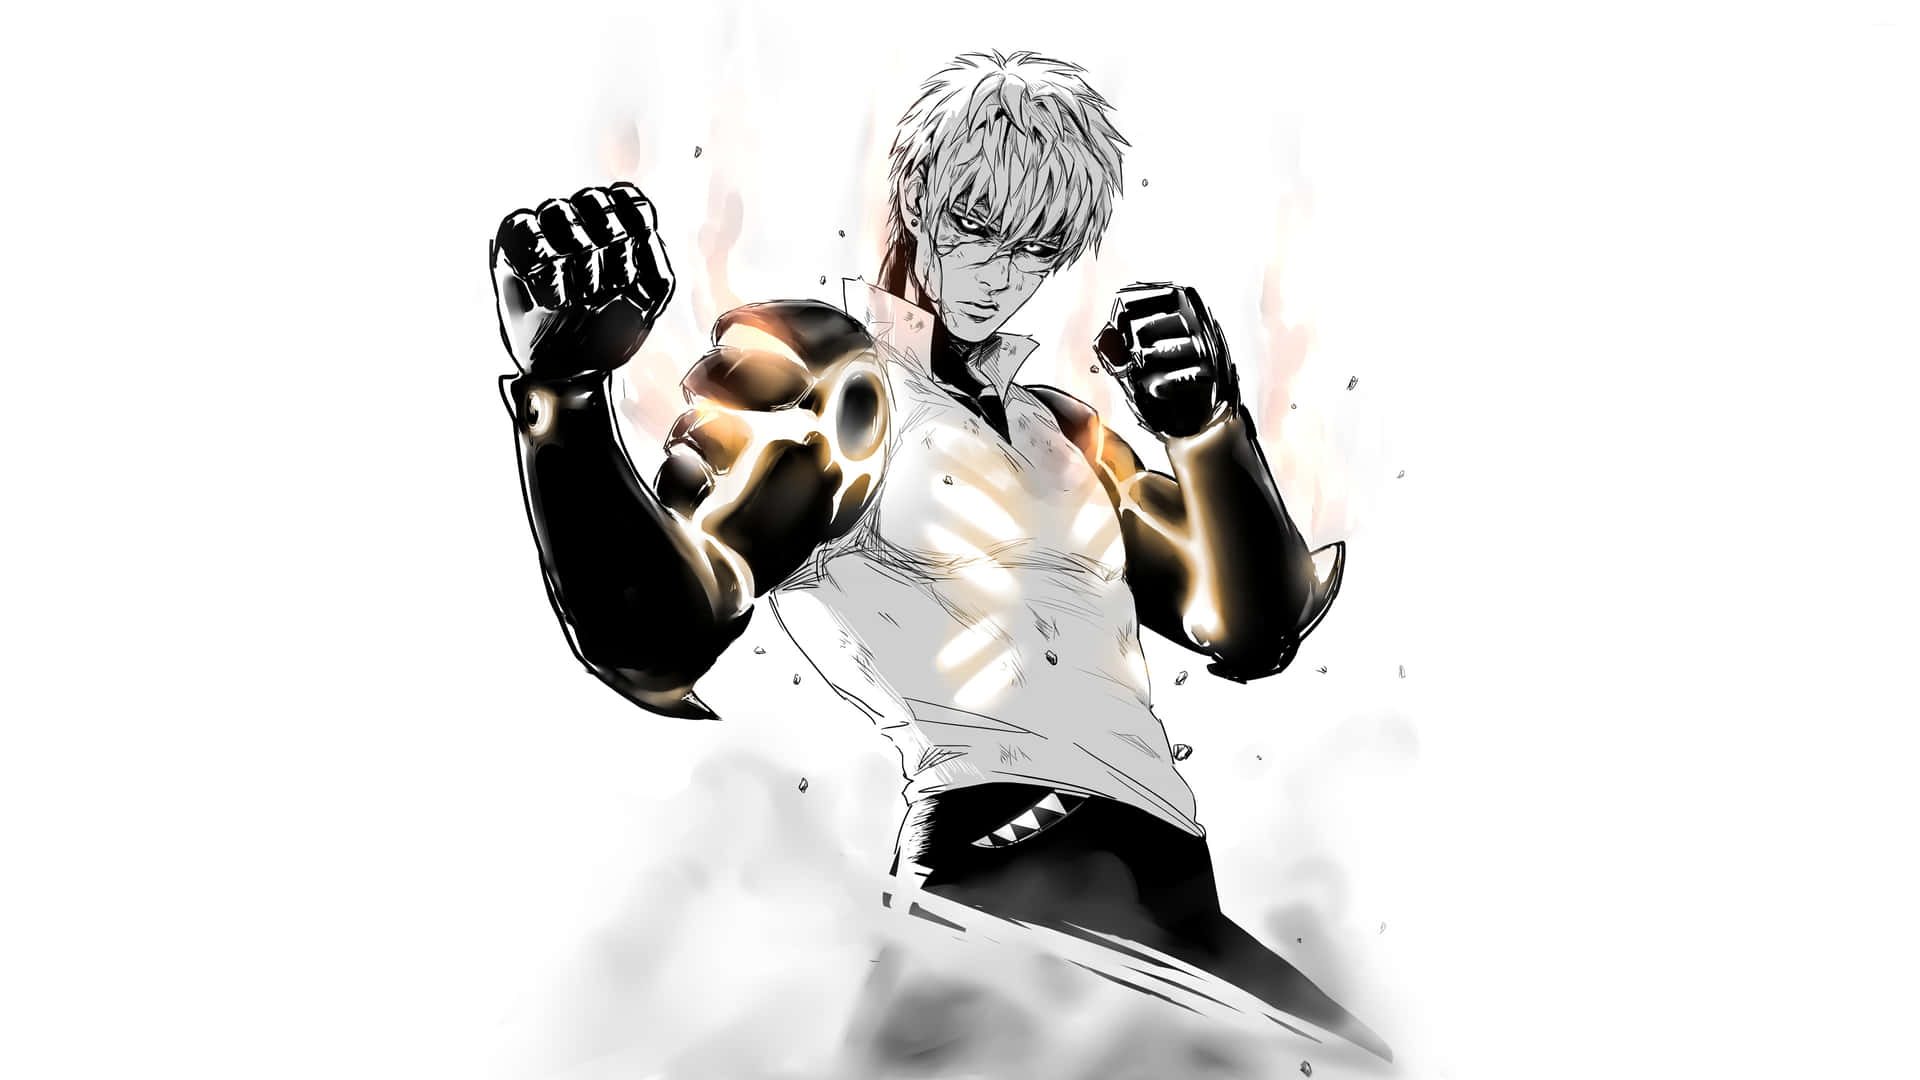 “One Punch Man”